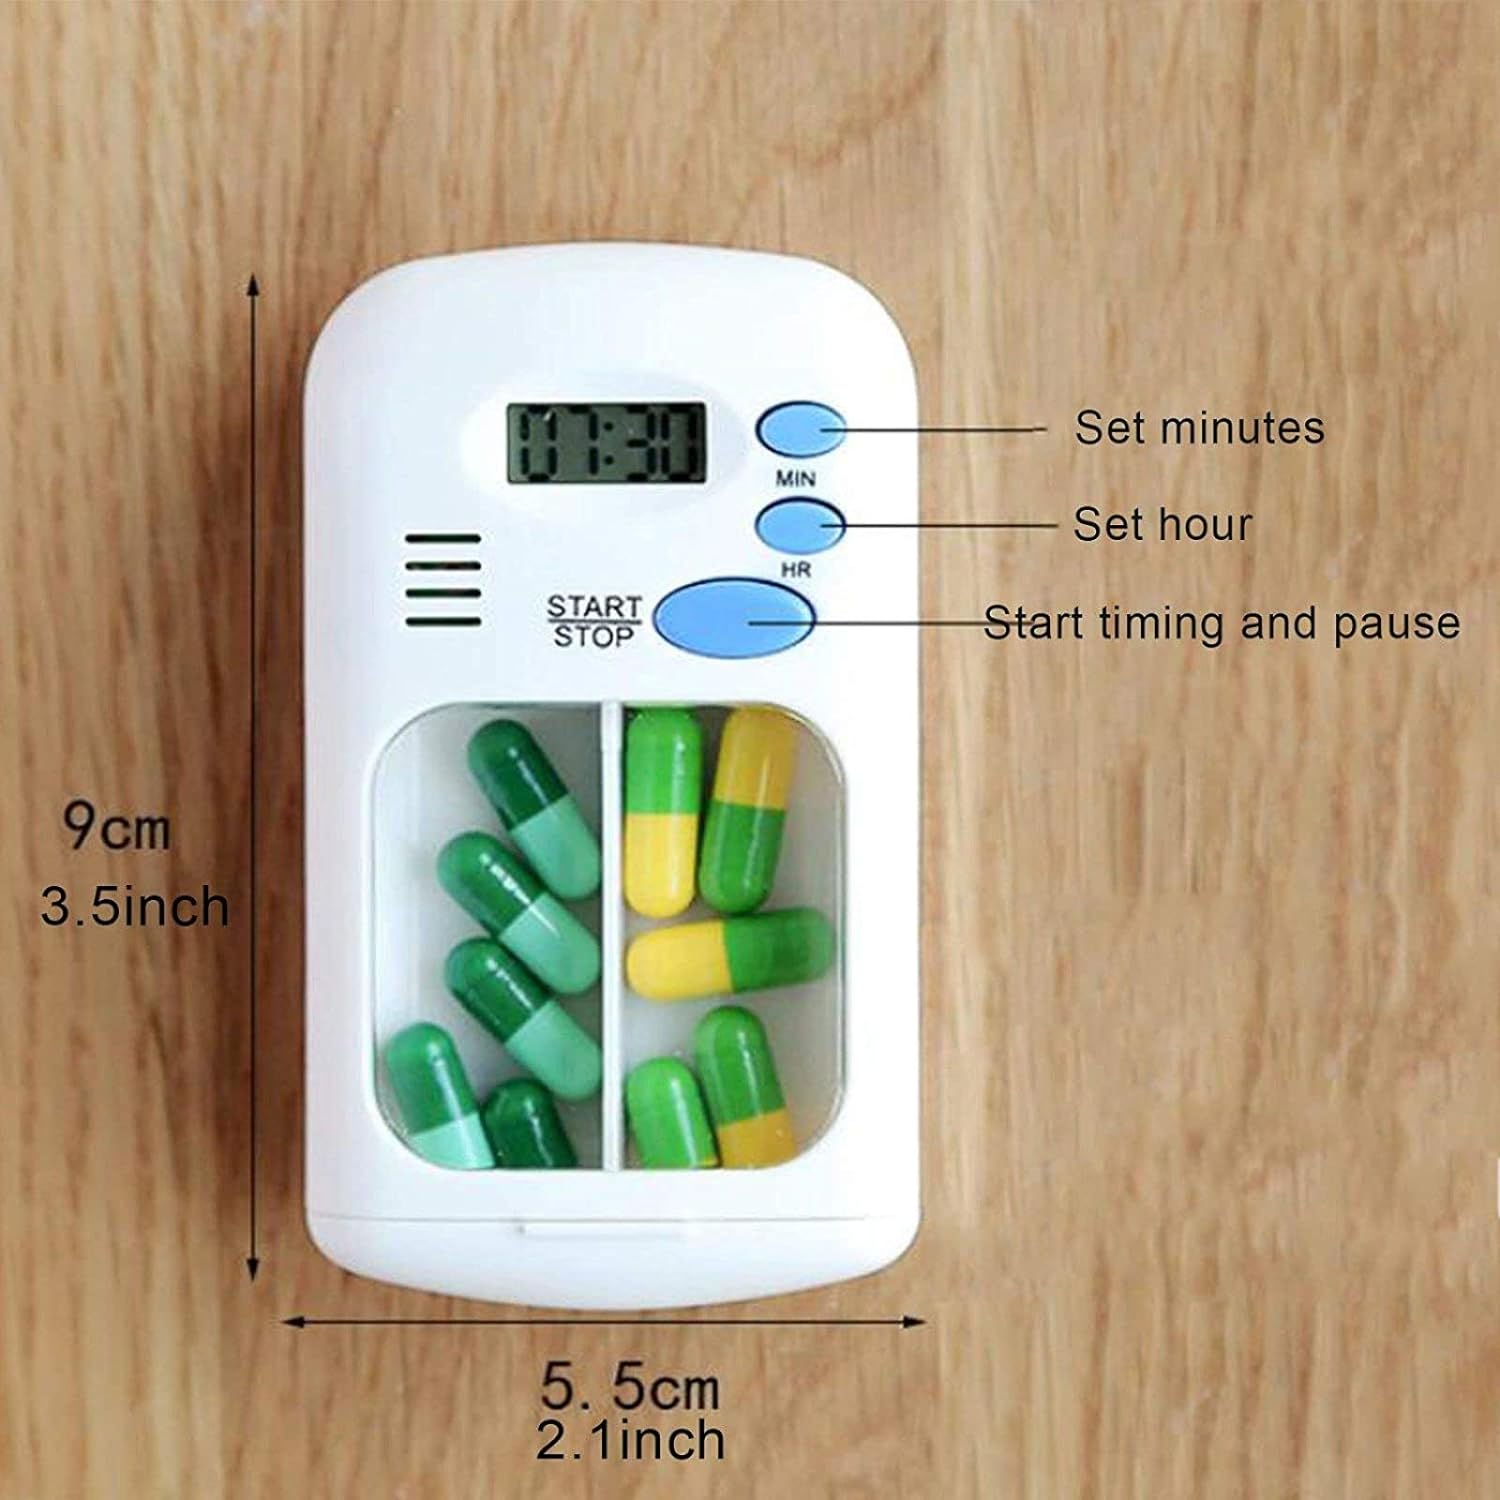 The Portable Mini Travel Carry Pill Box  featuring a compact size and convenient functionality